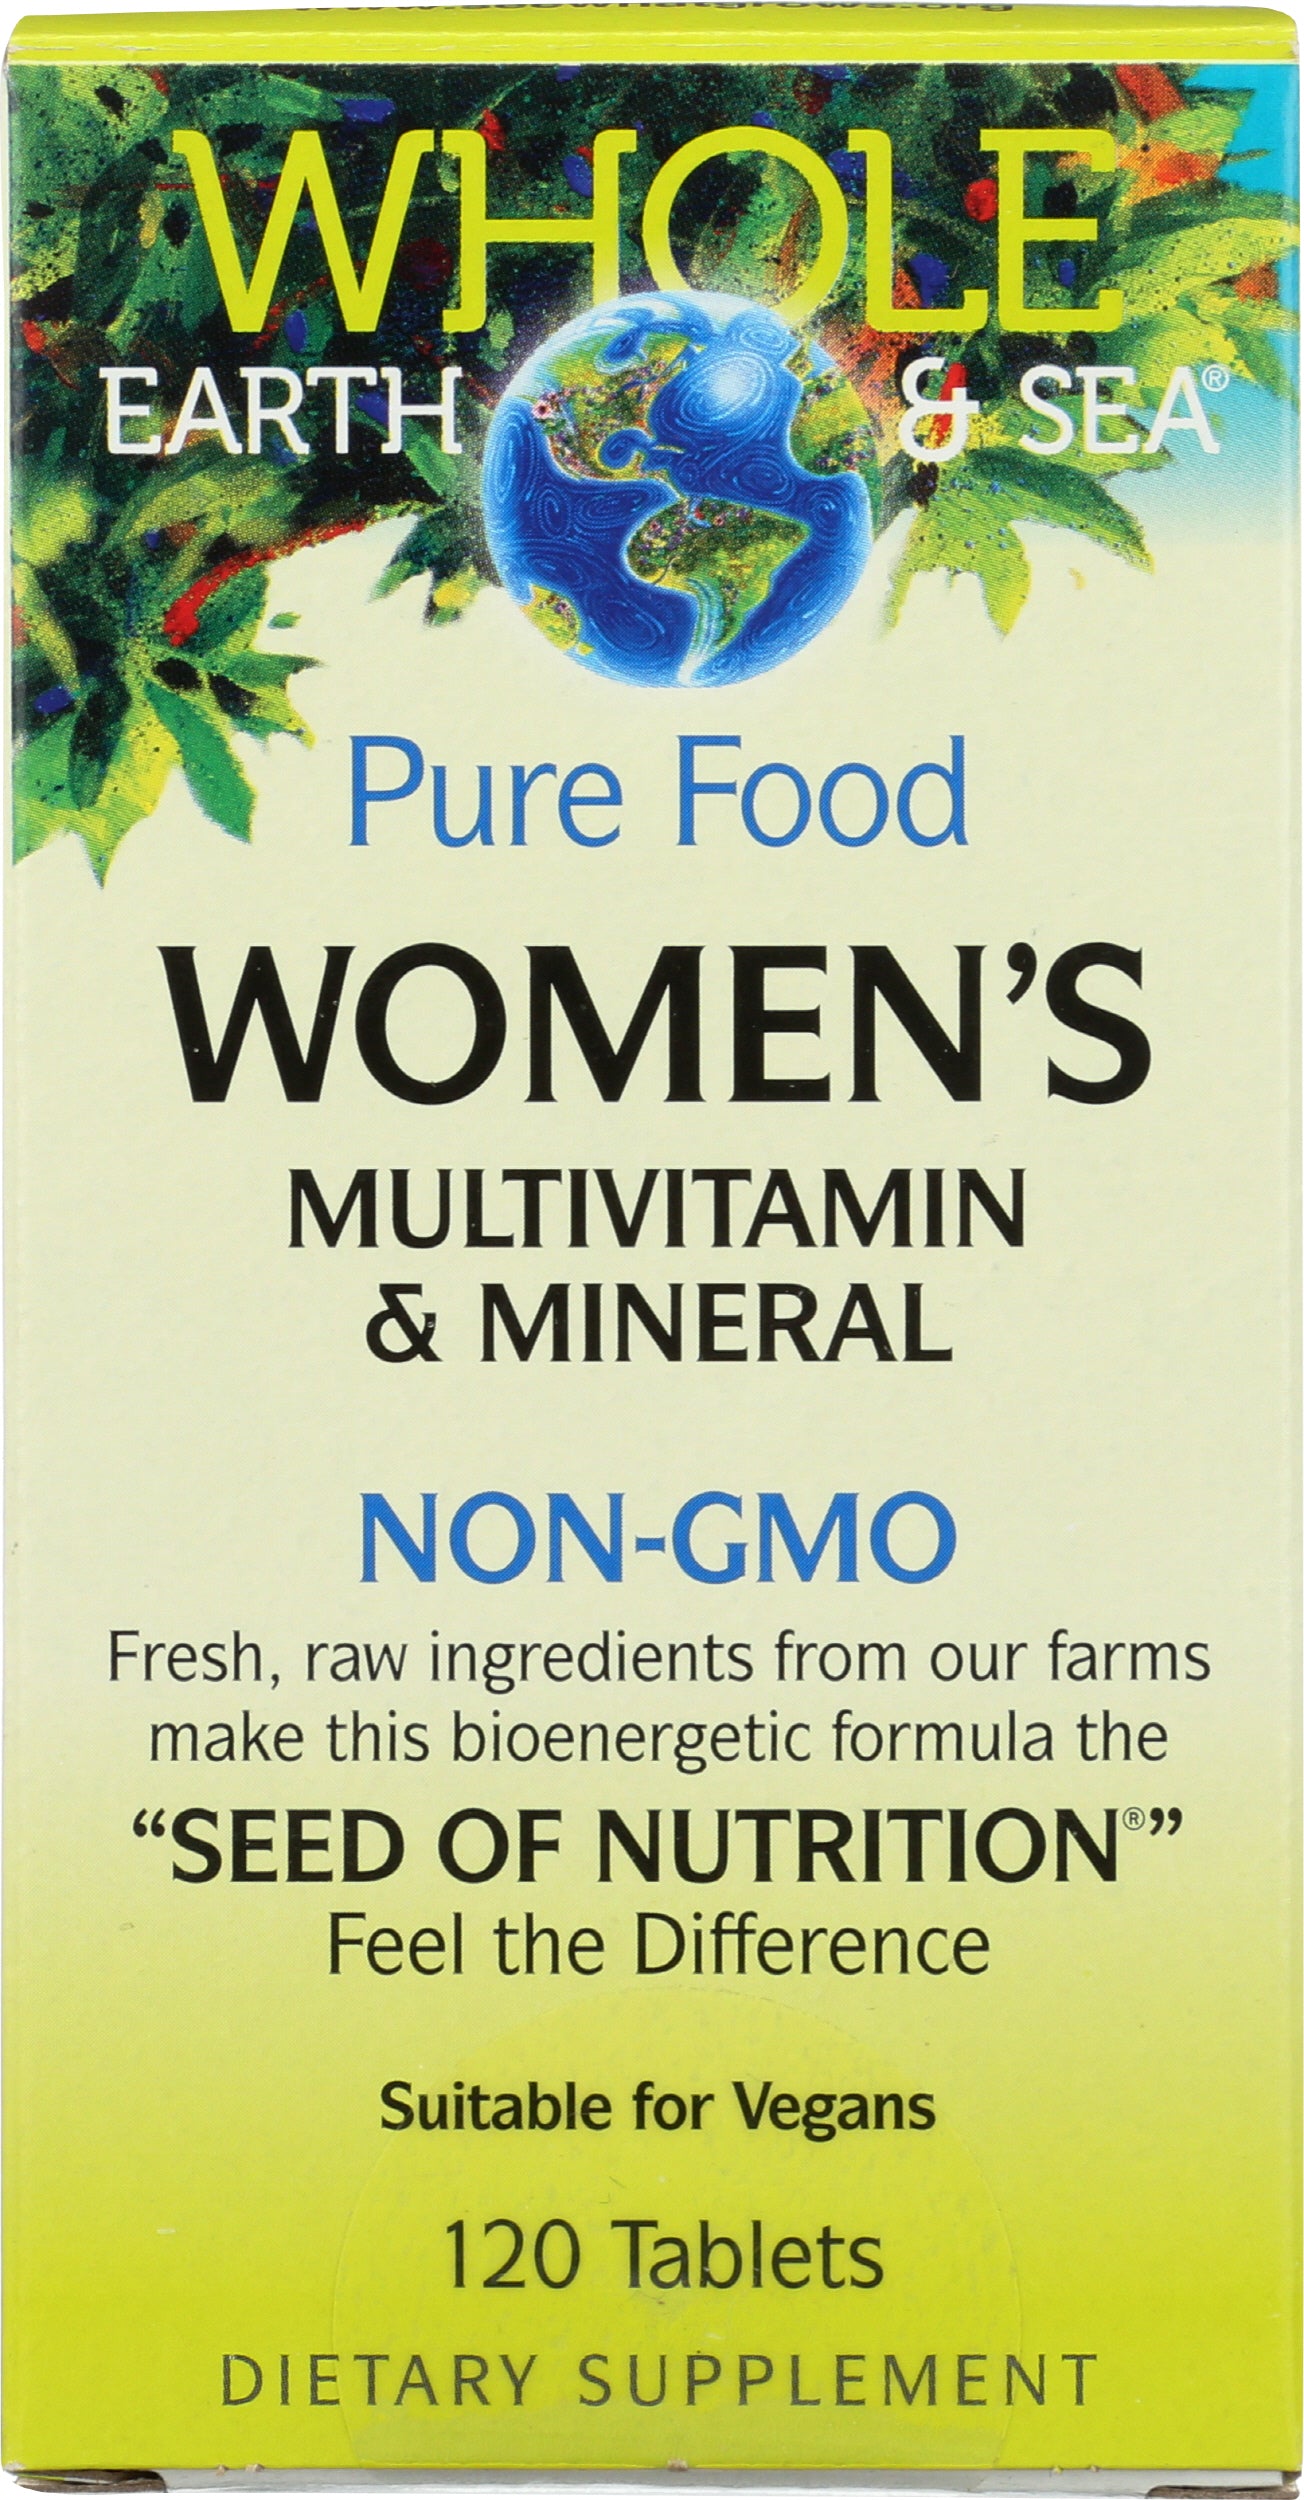 Whole Earth & Sea Women's Multivitamin 120 Tablets Front of Box